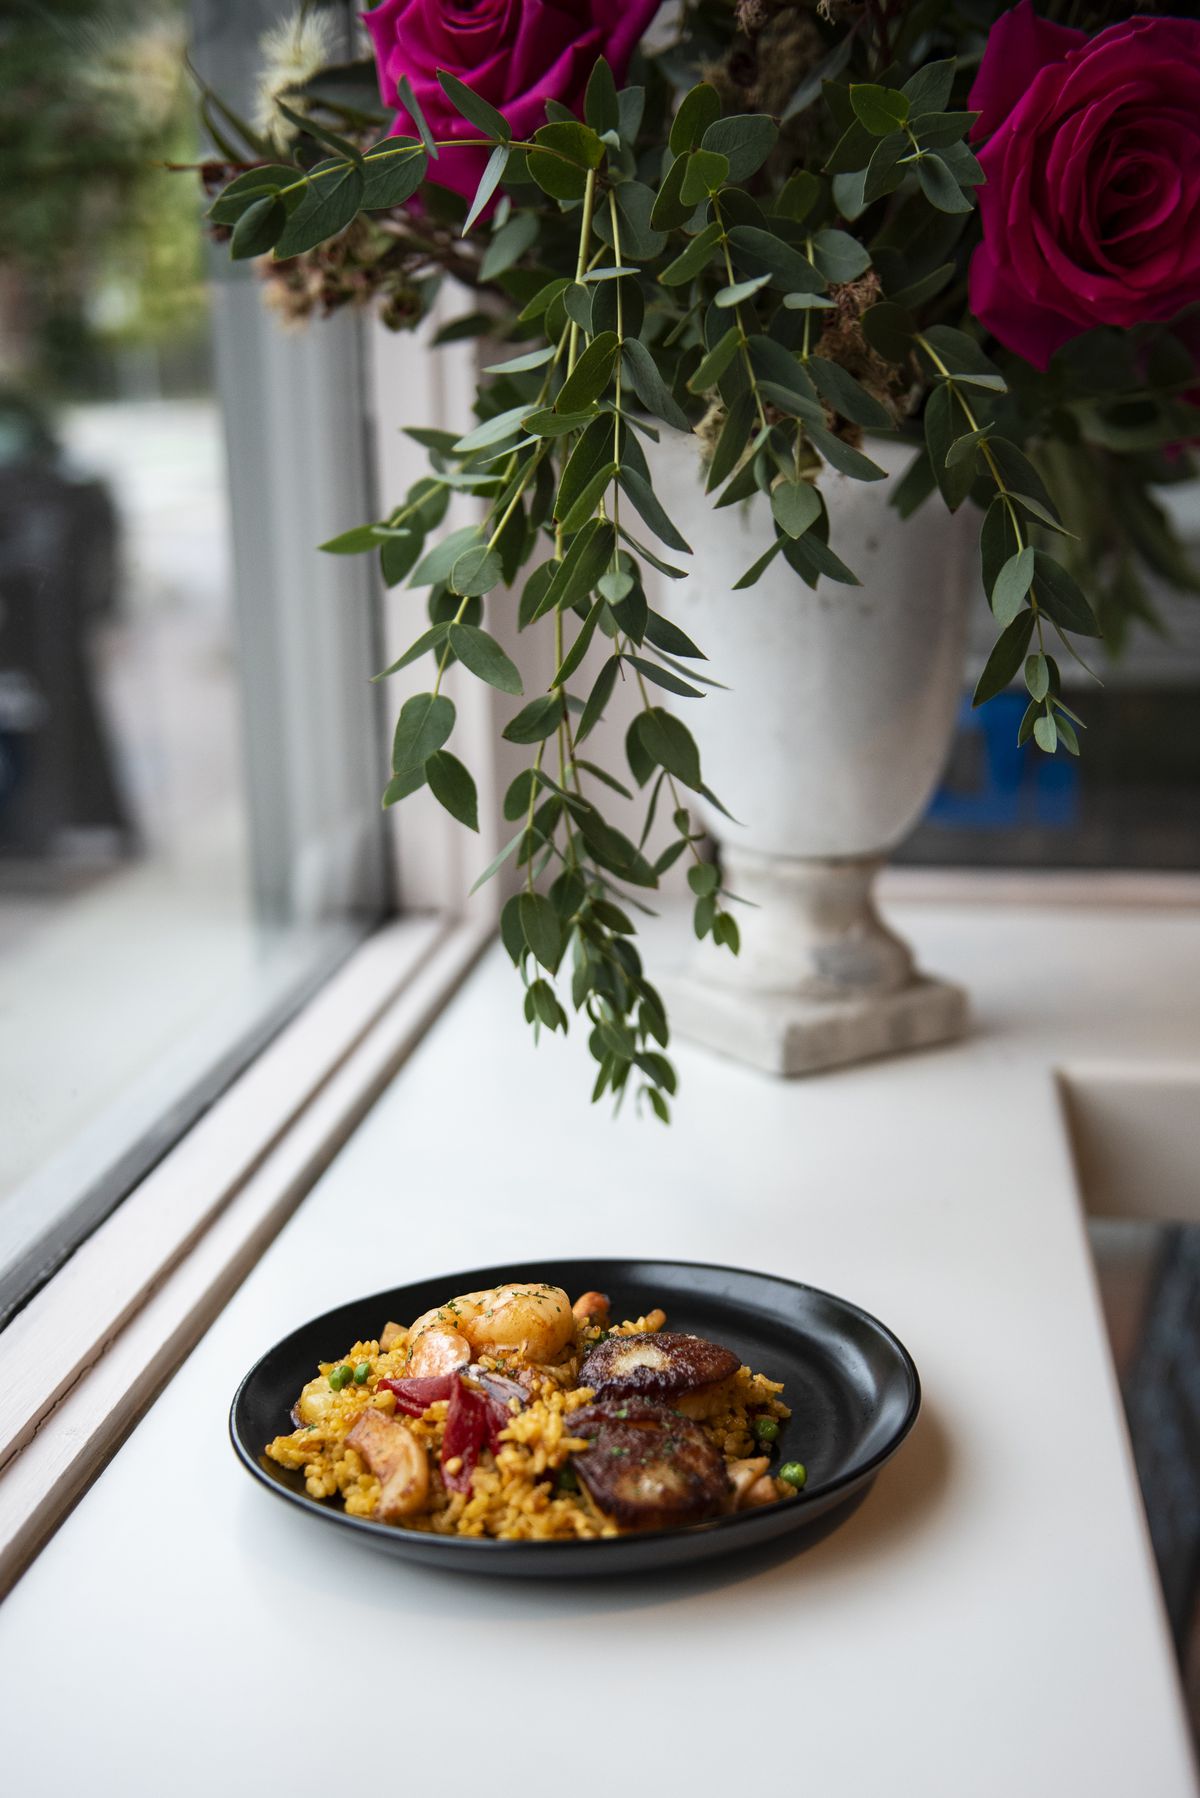 A plated dish of paella next to a white vase of roses on a white surface next to a window.